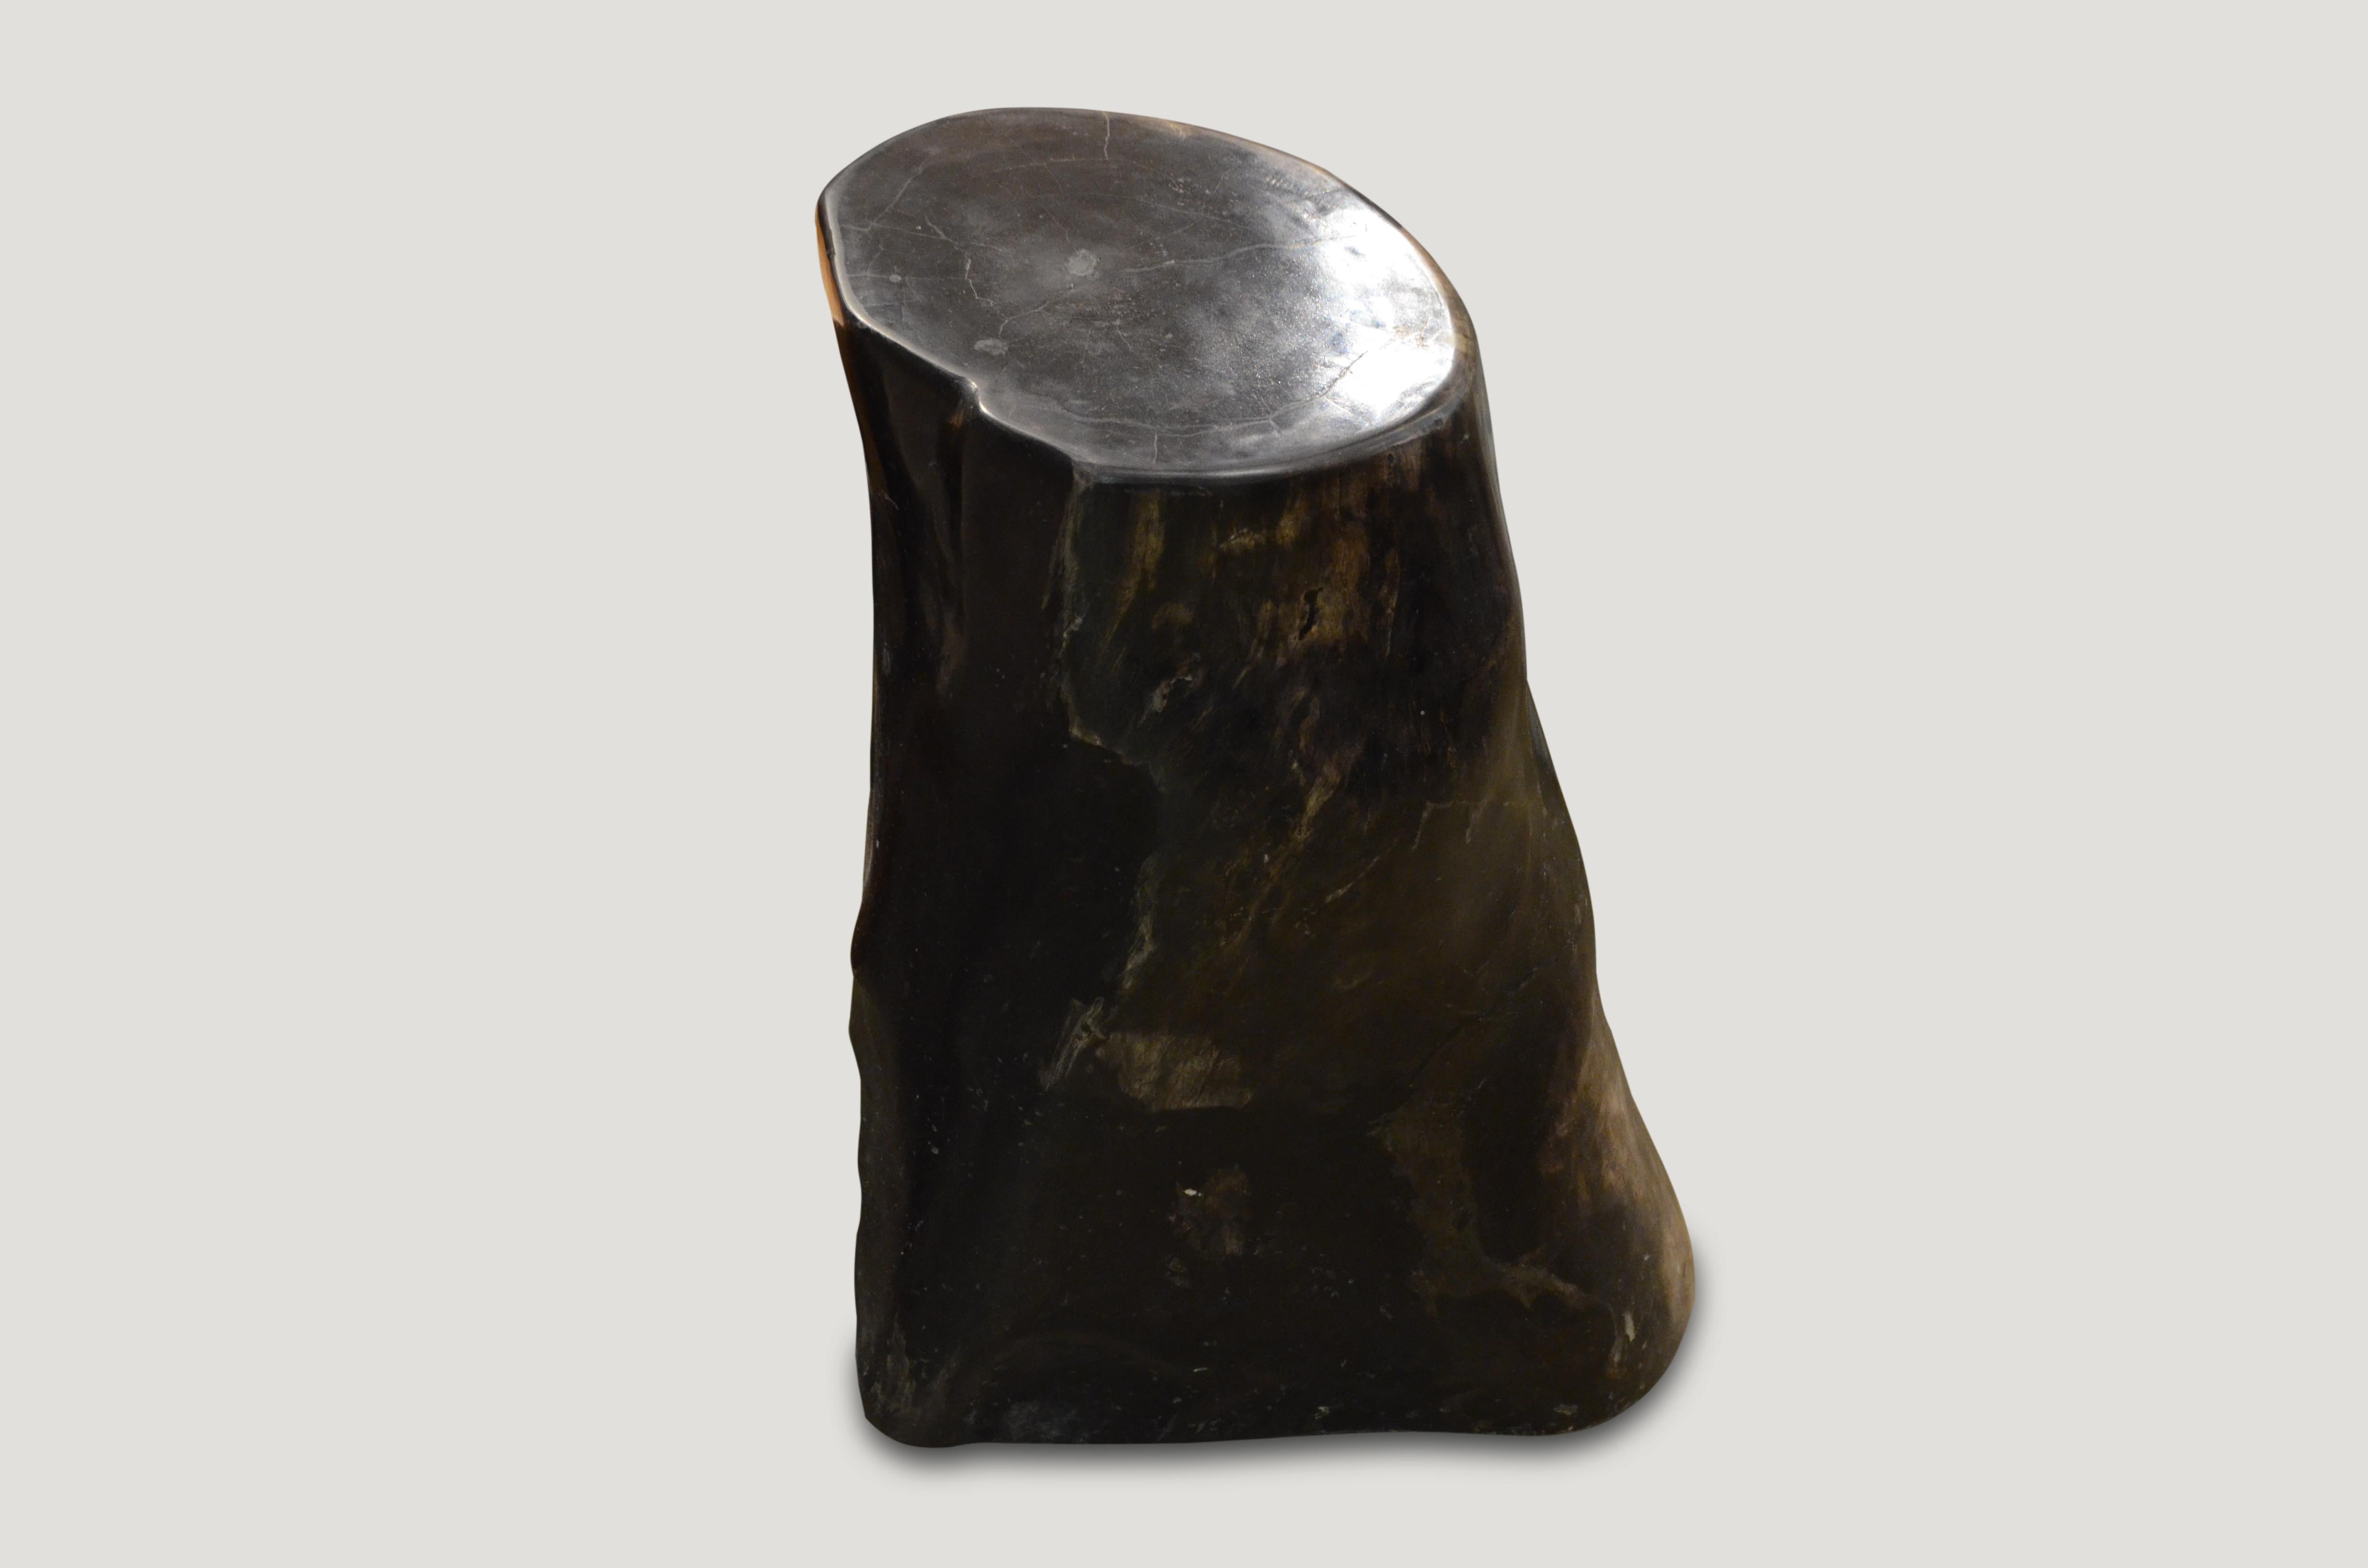 Black with charcoal grey and contrasting white tones on this super smooth petrified wood side table which resembles a male torso.

We source the highest quality petrified wood available. Each piece is hand-selected and highly polished with minimal